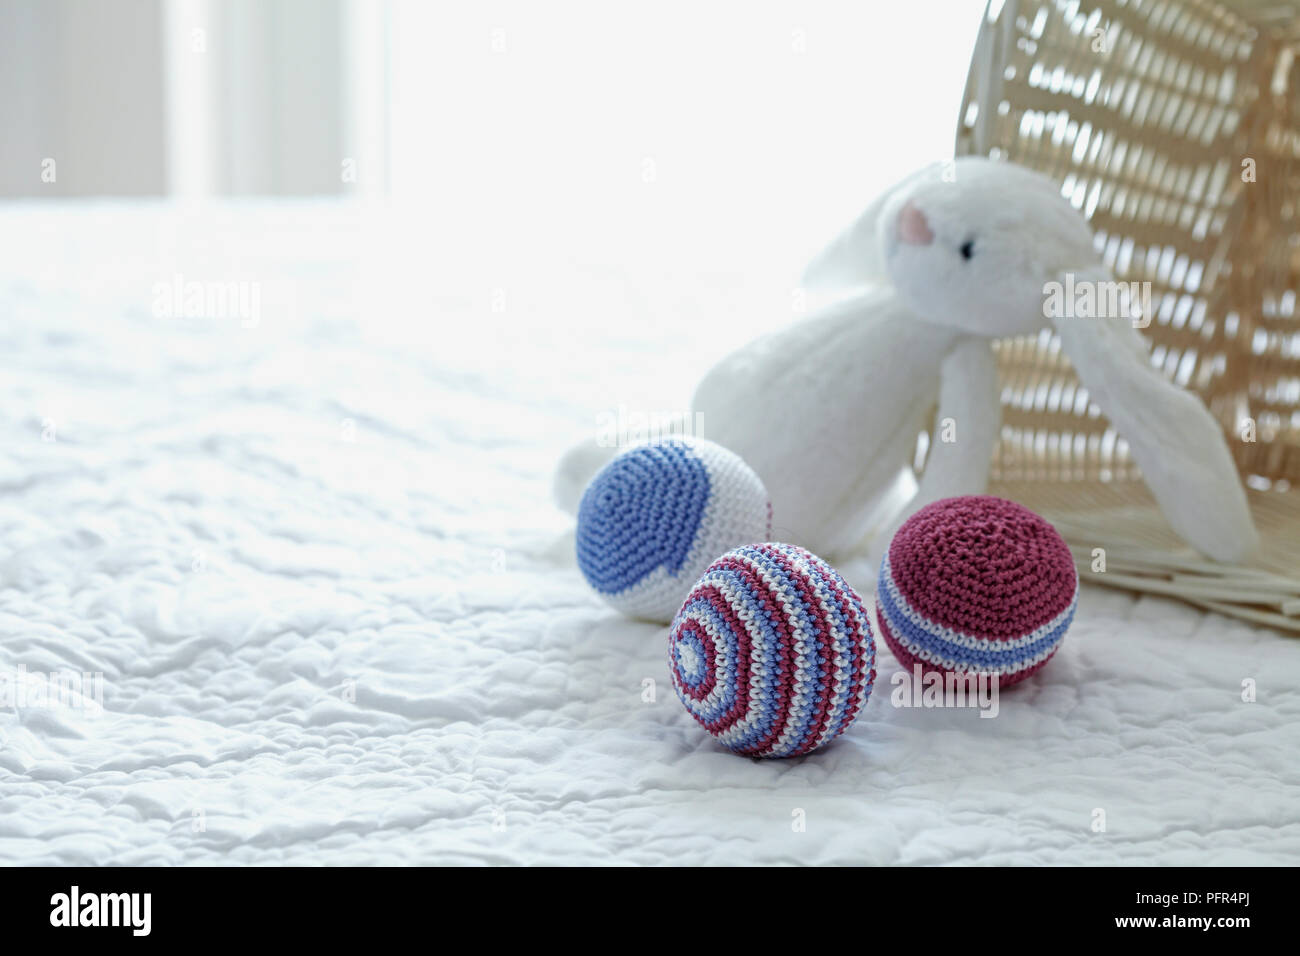 Crocheted toy balls and stuffed toy rabbit on a bed Stock Photo